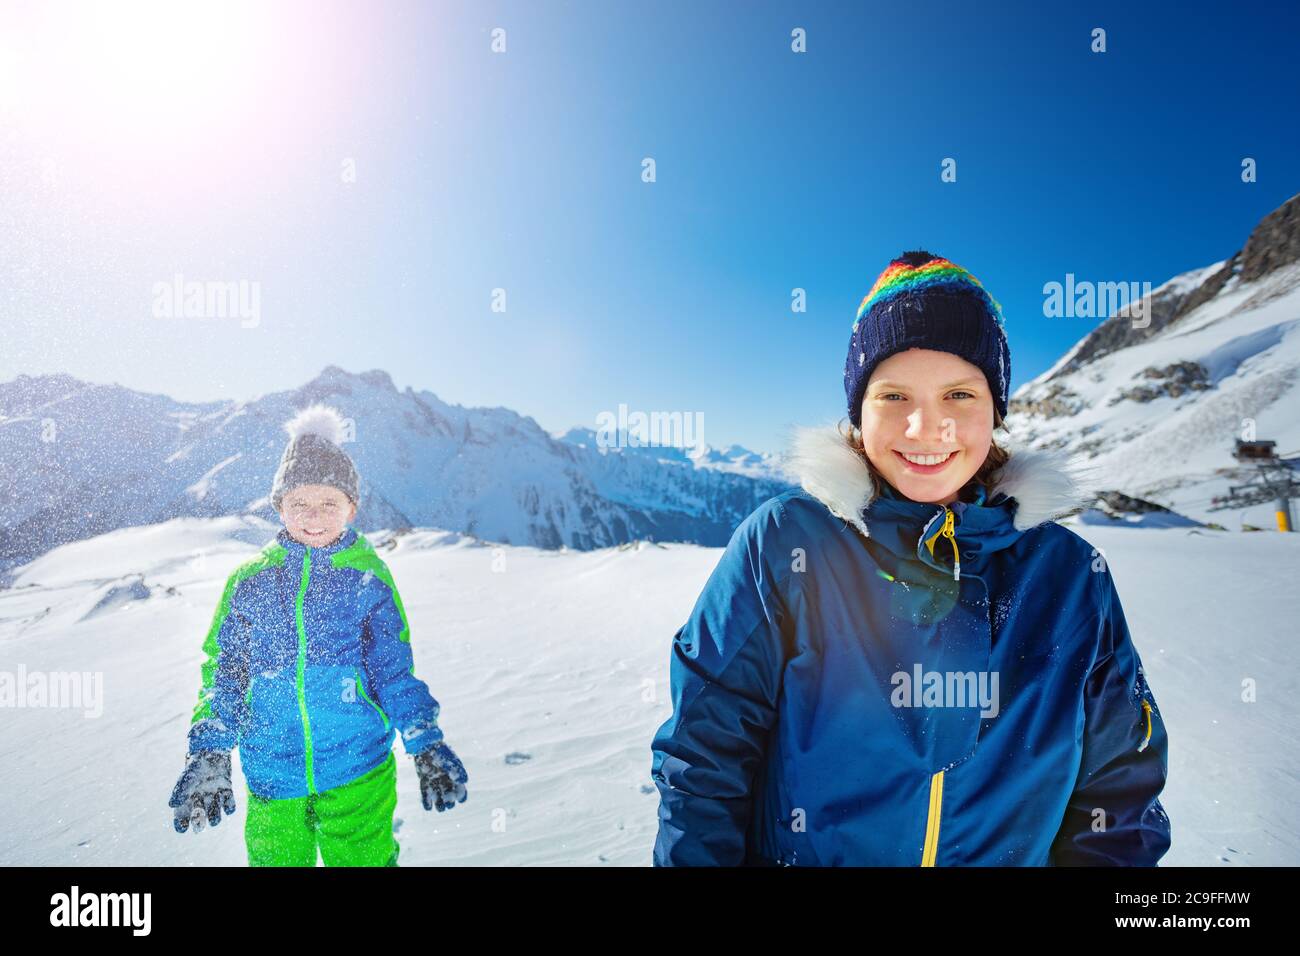 Two happy kids girl with boy have fun stand together throw snow in the air over beautiful mountain view Stock Photo